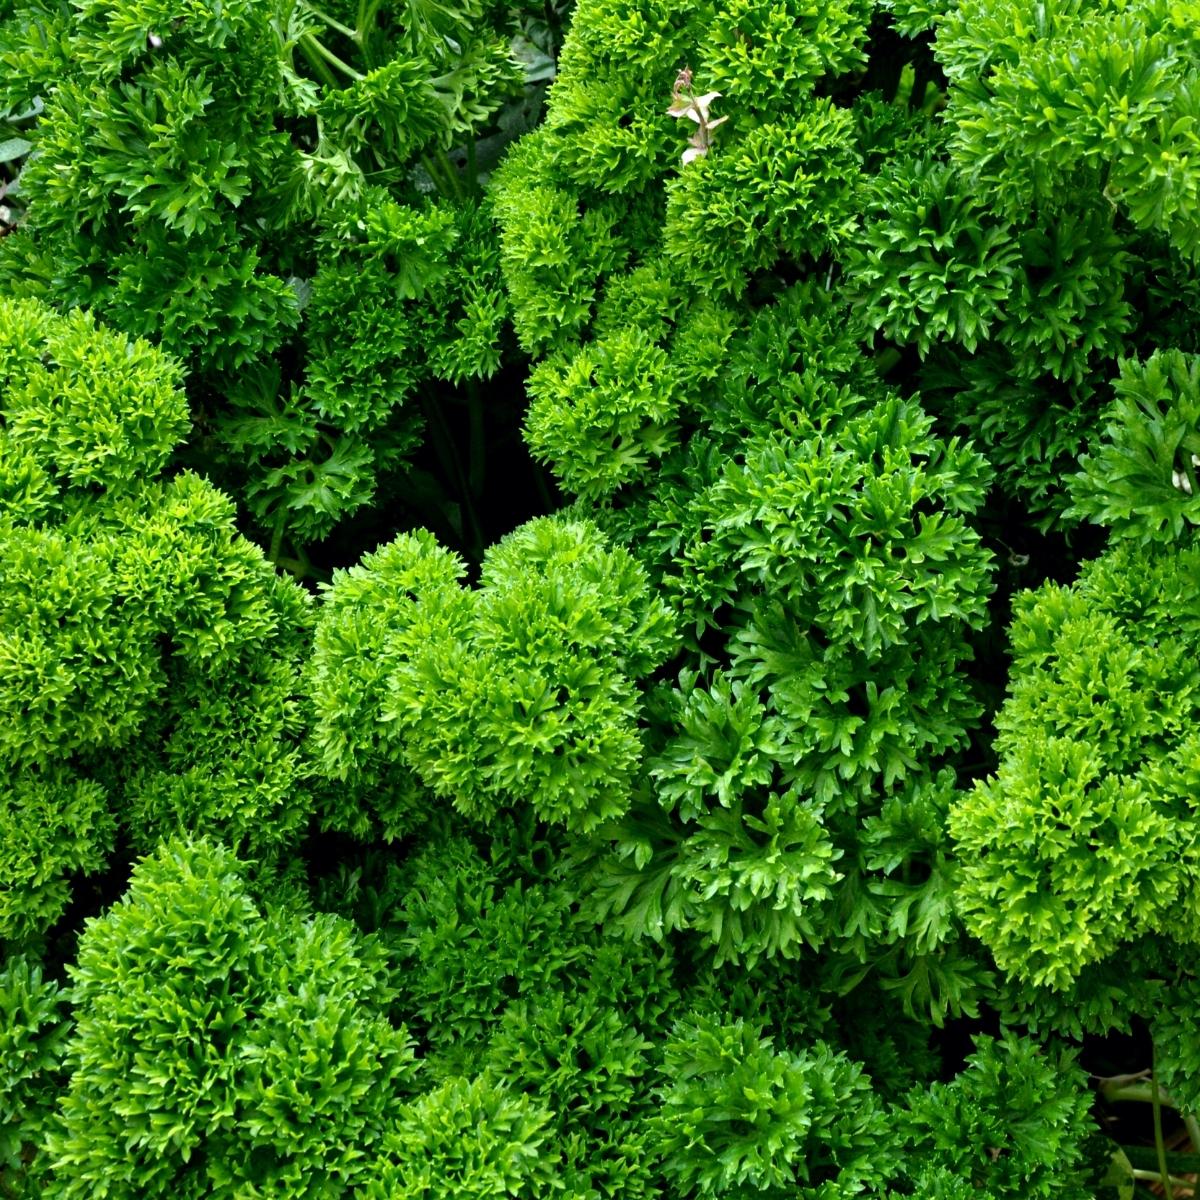 Looking down at bright curly parsley.